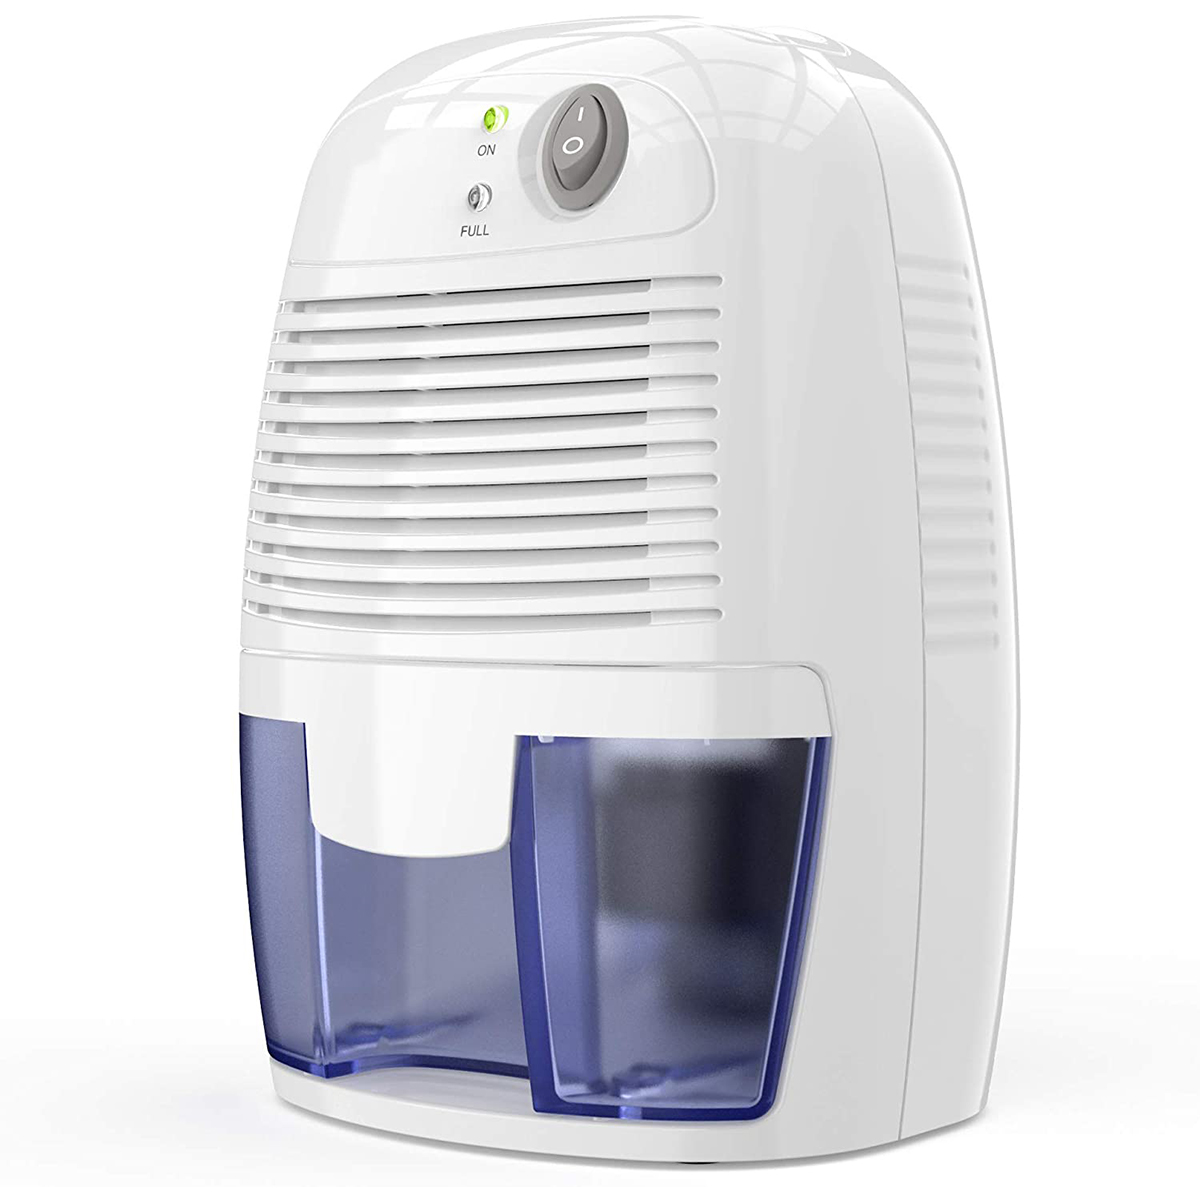 Luftentfeuchter Raumentfeuchter Dehumidifier 300 ml/Tag 15 m² LED